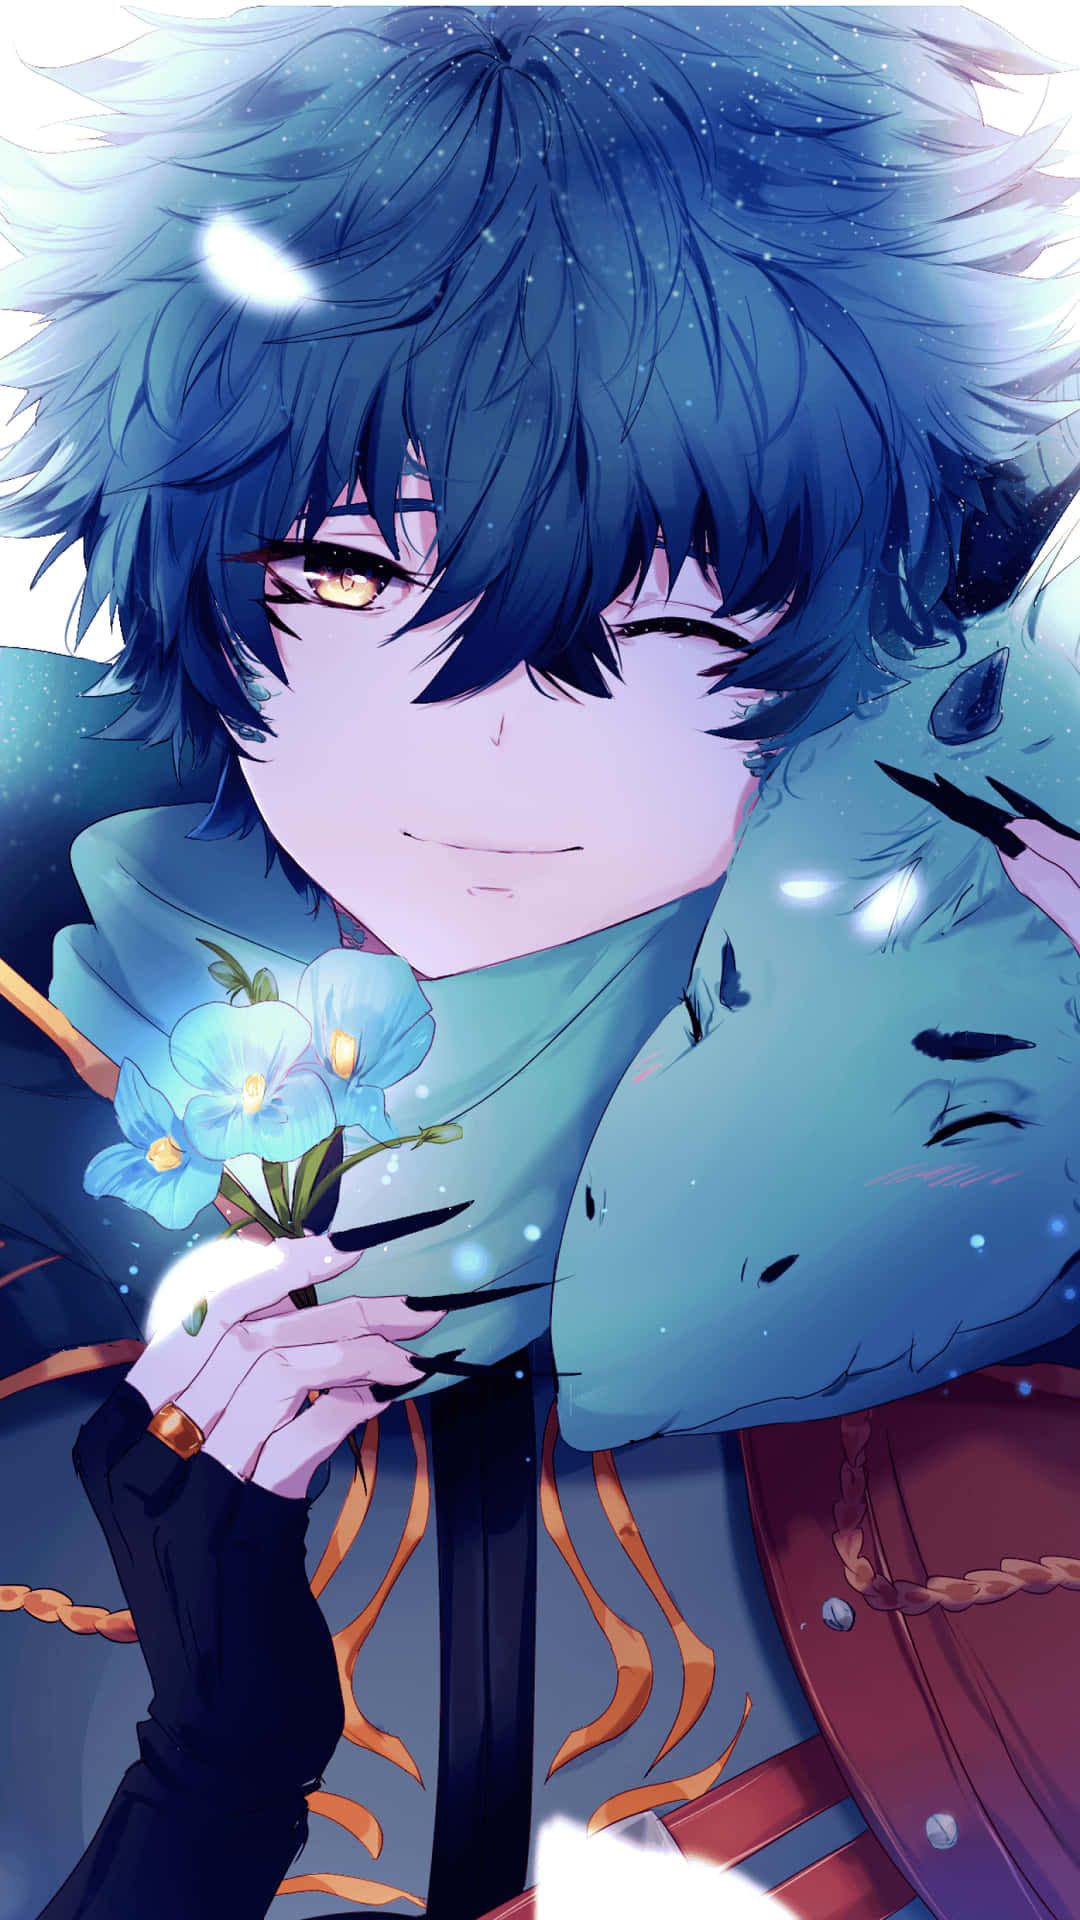 A Boy With Blue Hair Holding A Flower